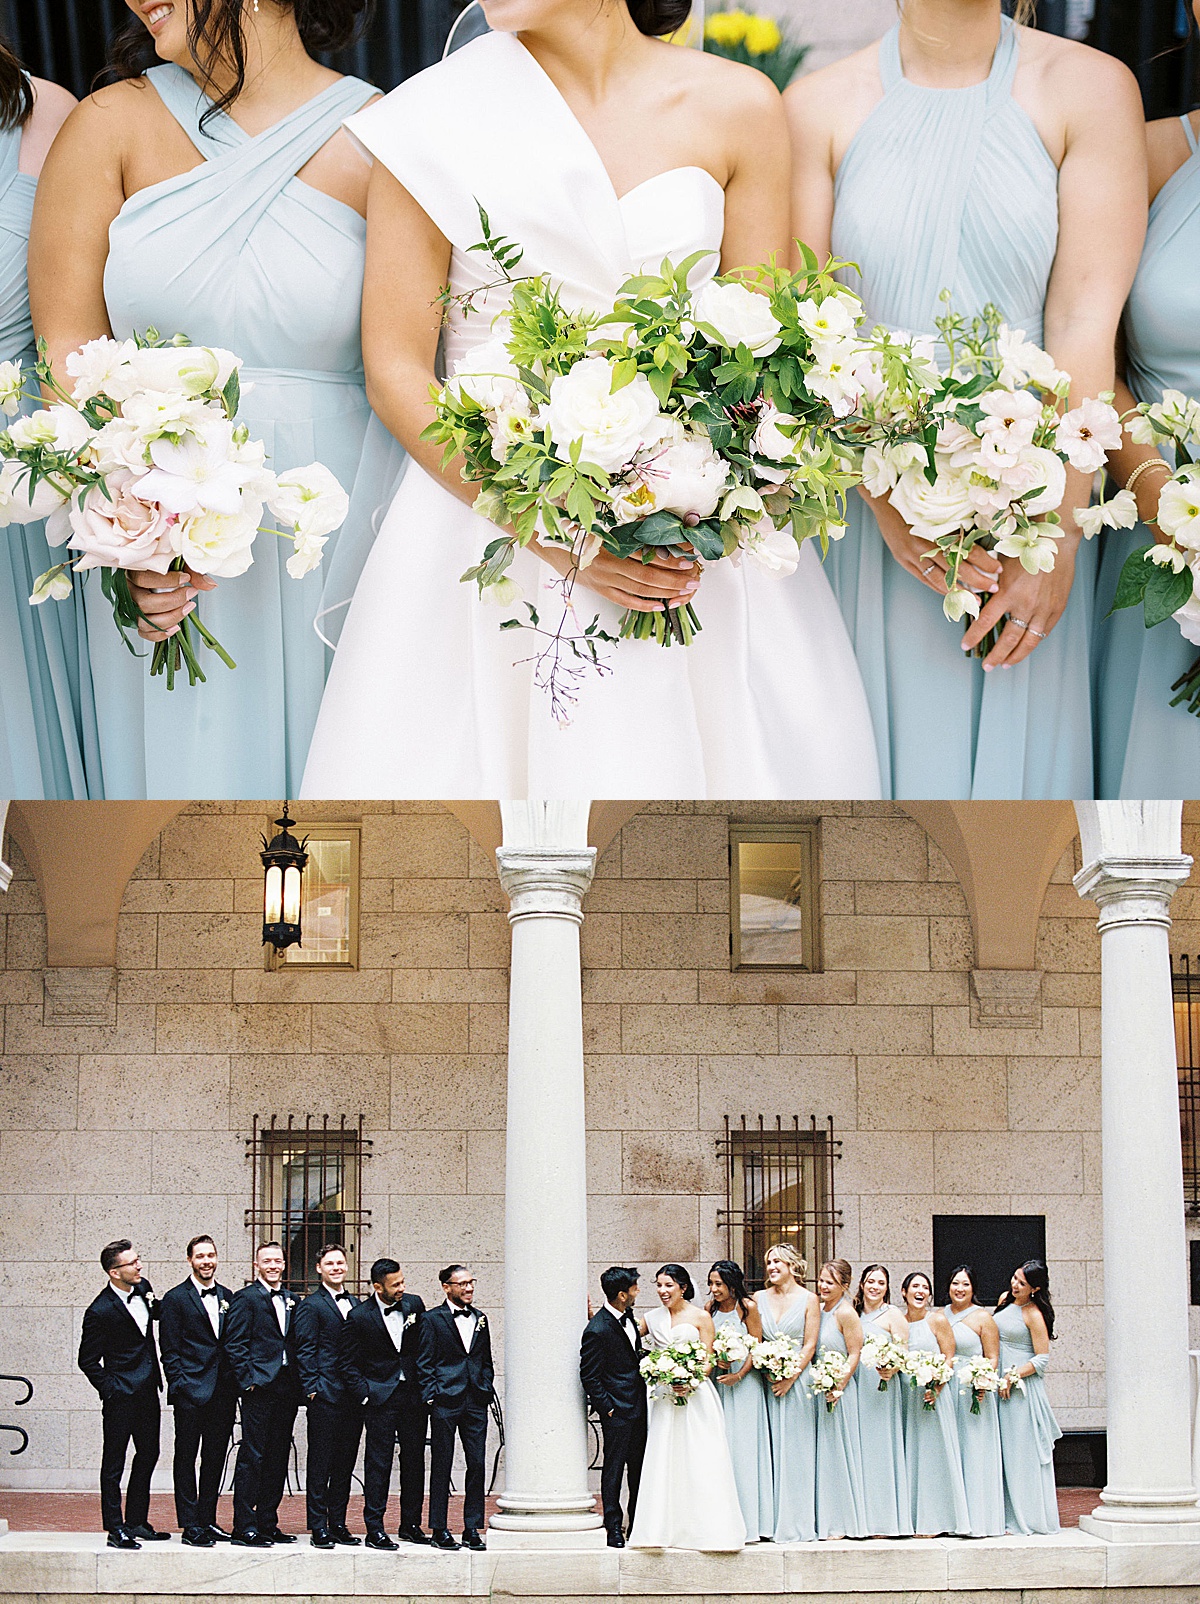 bridal party images with blue dresses photos by Lynne Reznick Photography 